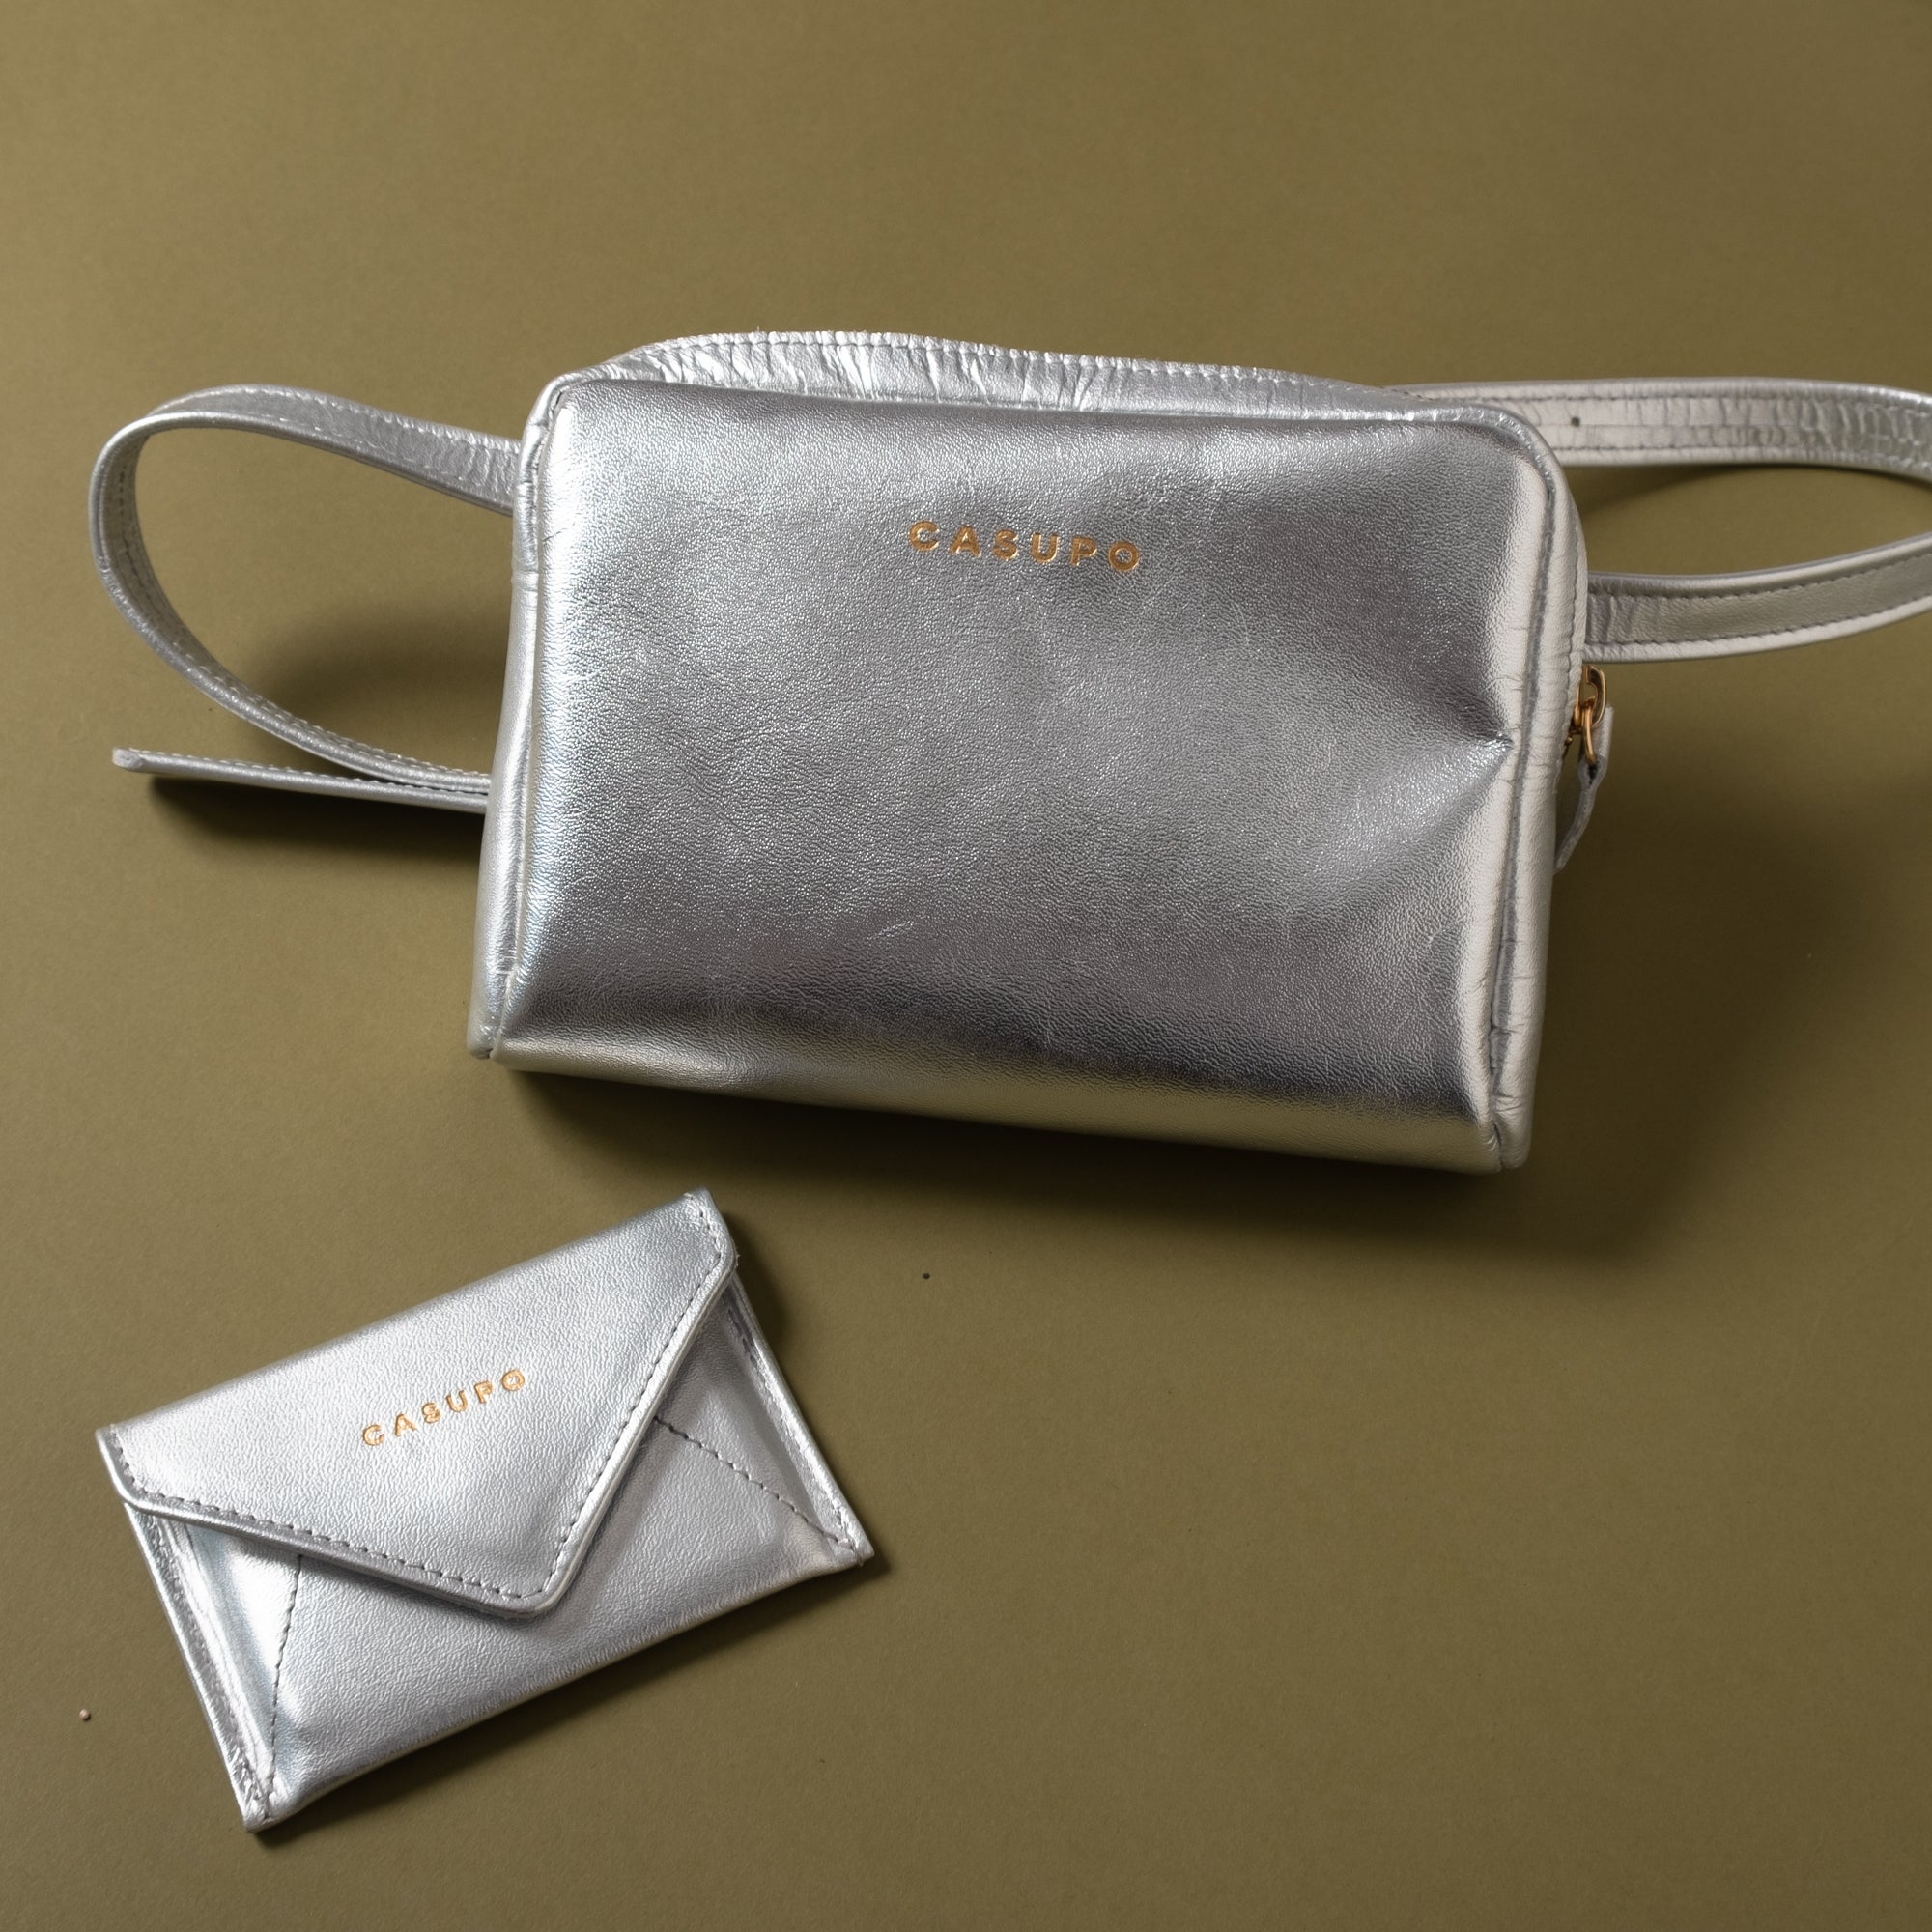 silver leather fanny pack purse for women